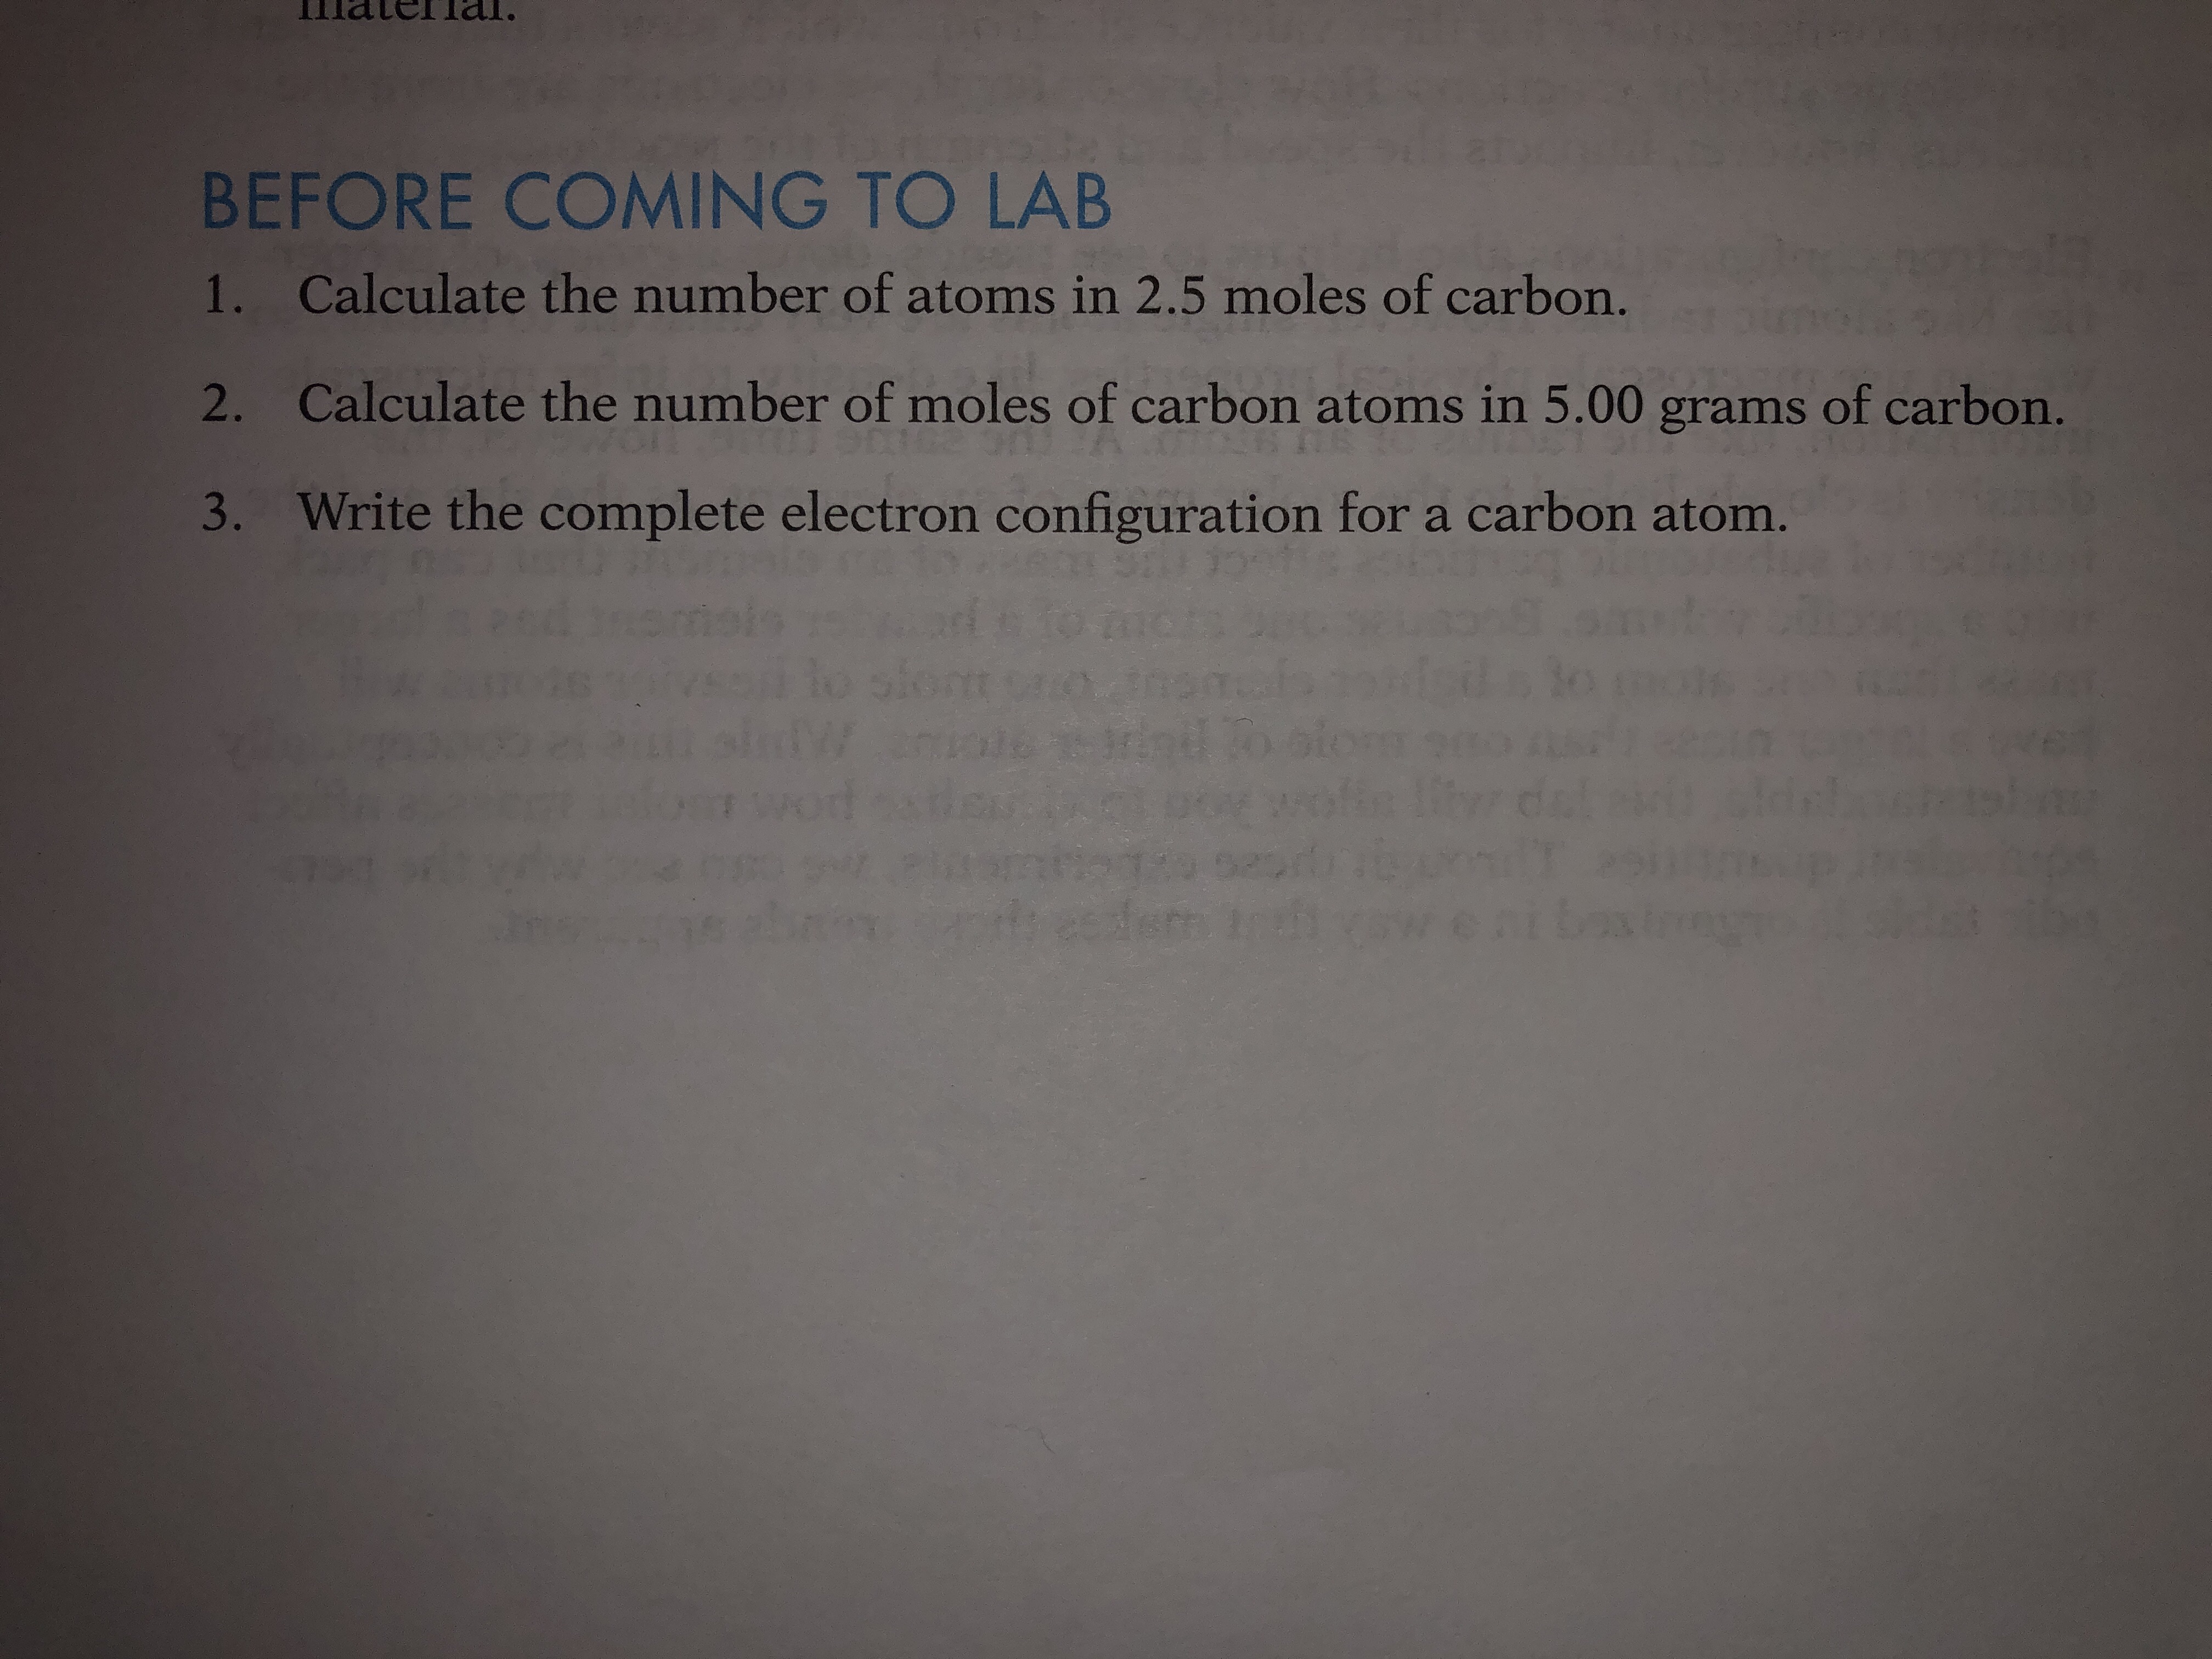 BEFORE COMING TO LAB
1. Calculate the number of atoms in 2.5 moles of carbon.
2. Calculate the number of moles of carbon atoms in 5.00 grams of carbon
3. Write the complete electron configuration for a carbon atom.
